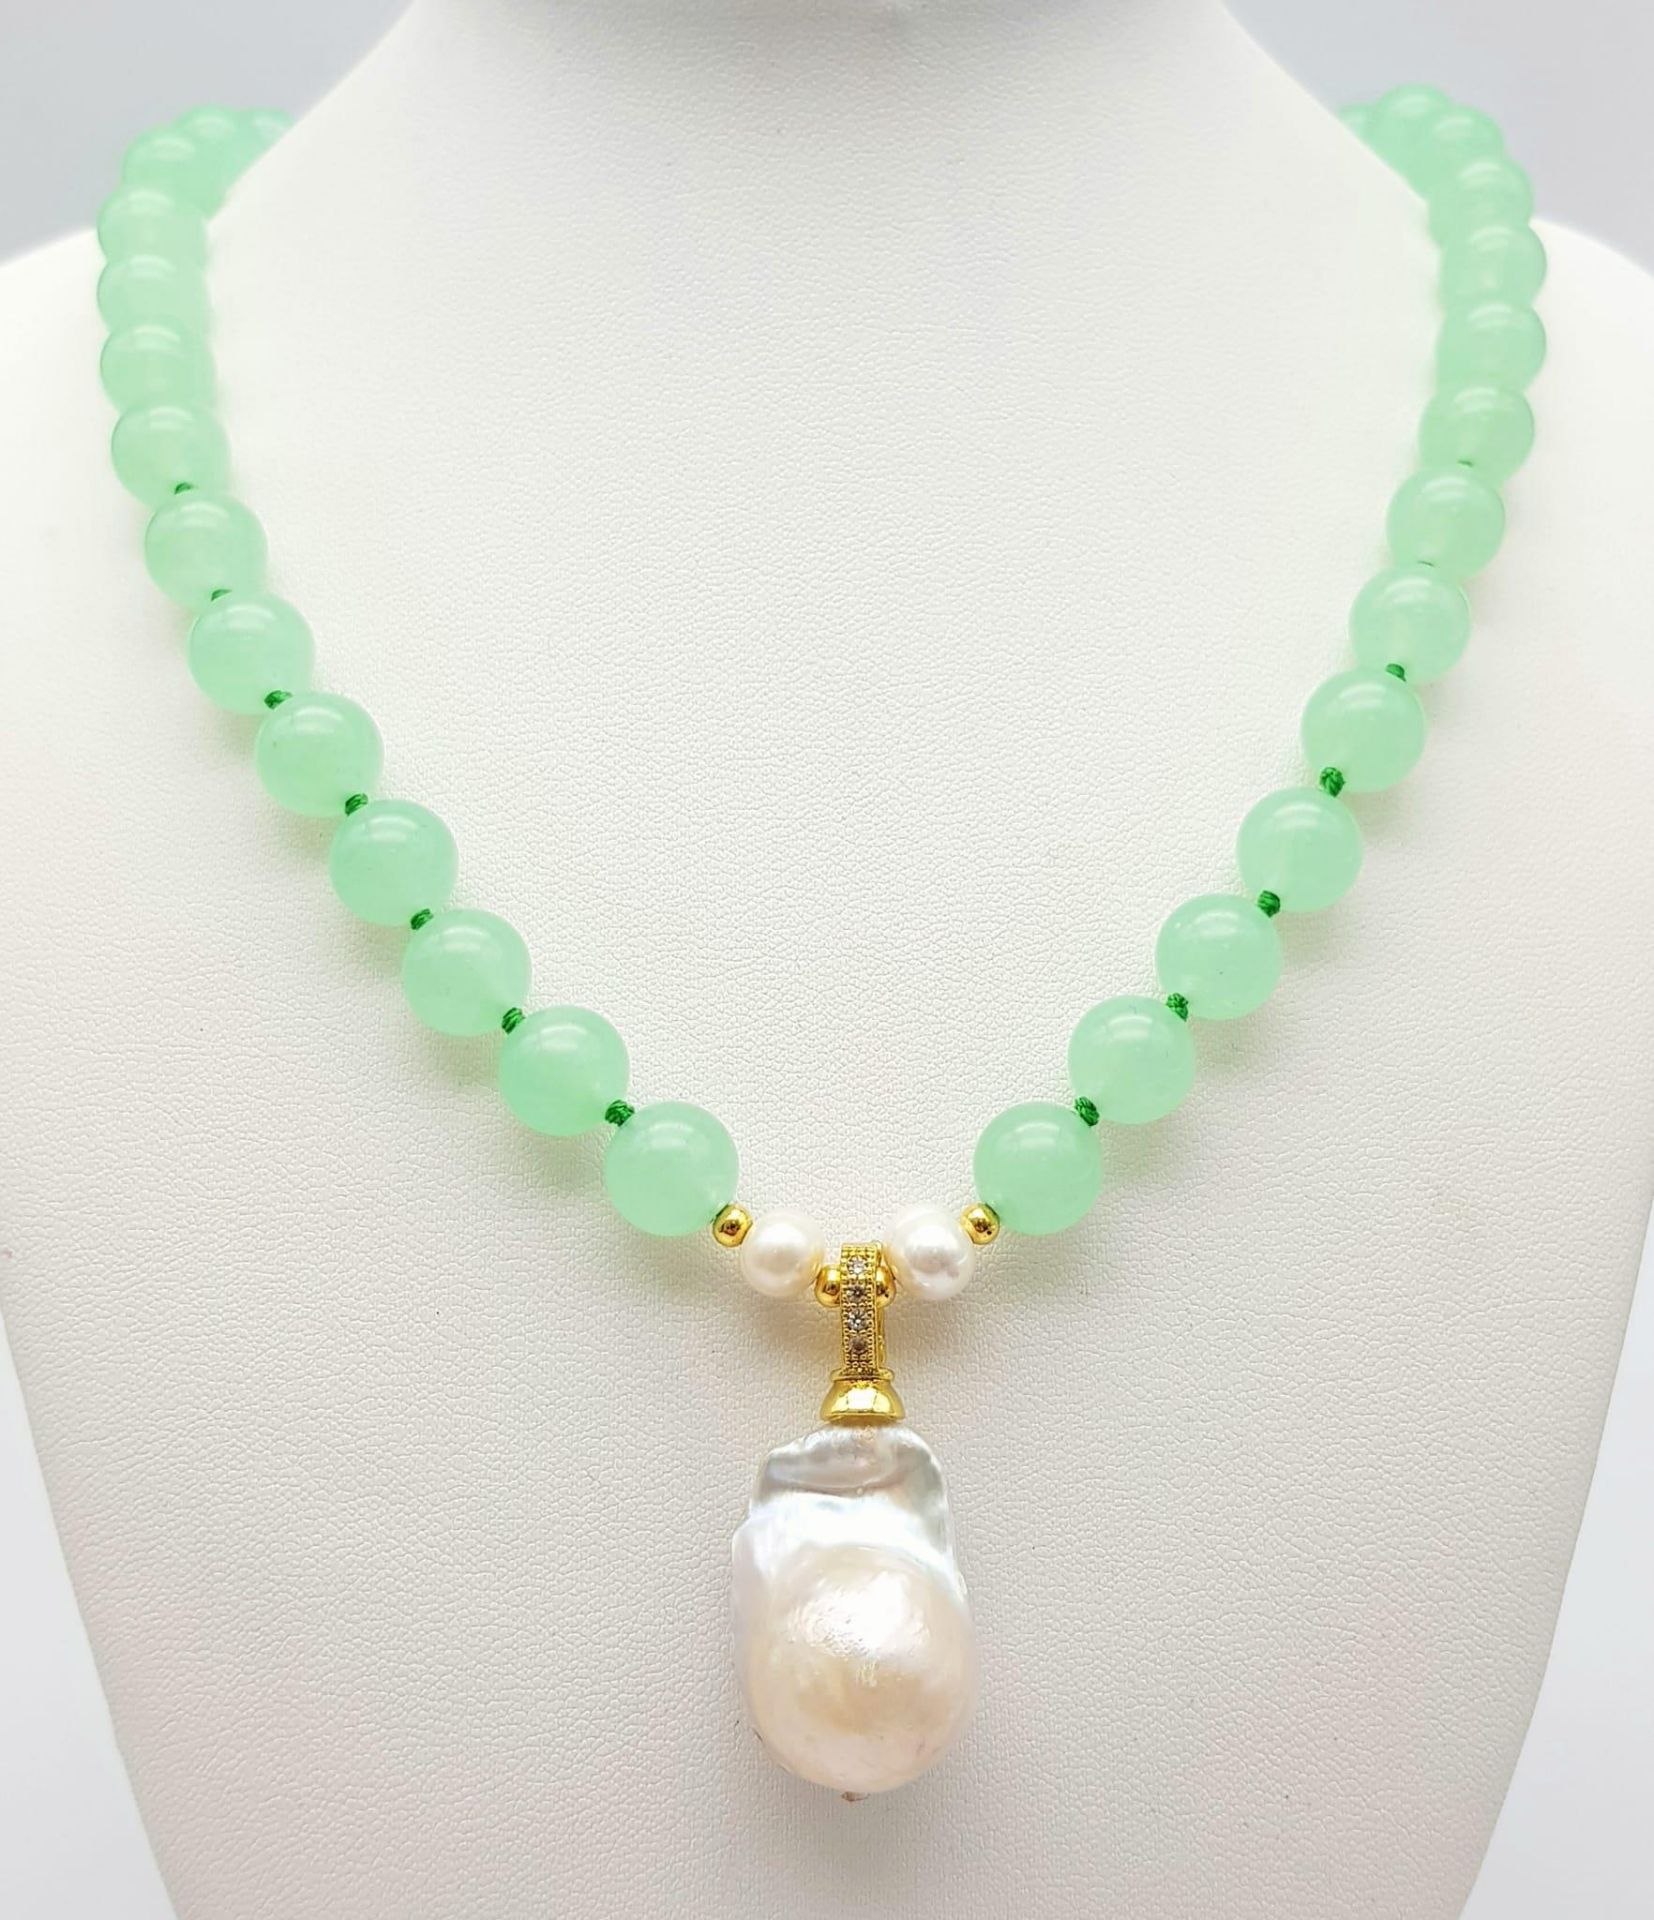 A Lime Green Jade Bead Necklace with Keisha Pearl Drop Pendant. 10mm jade beads with cultured